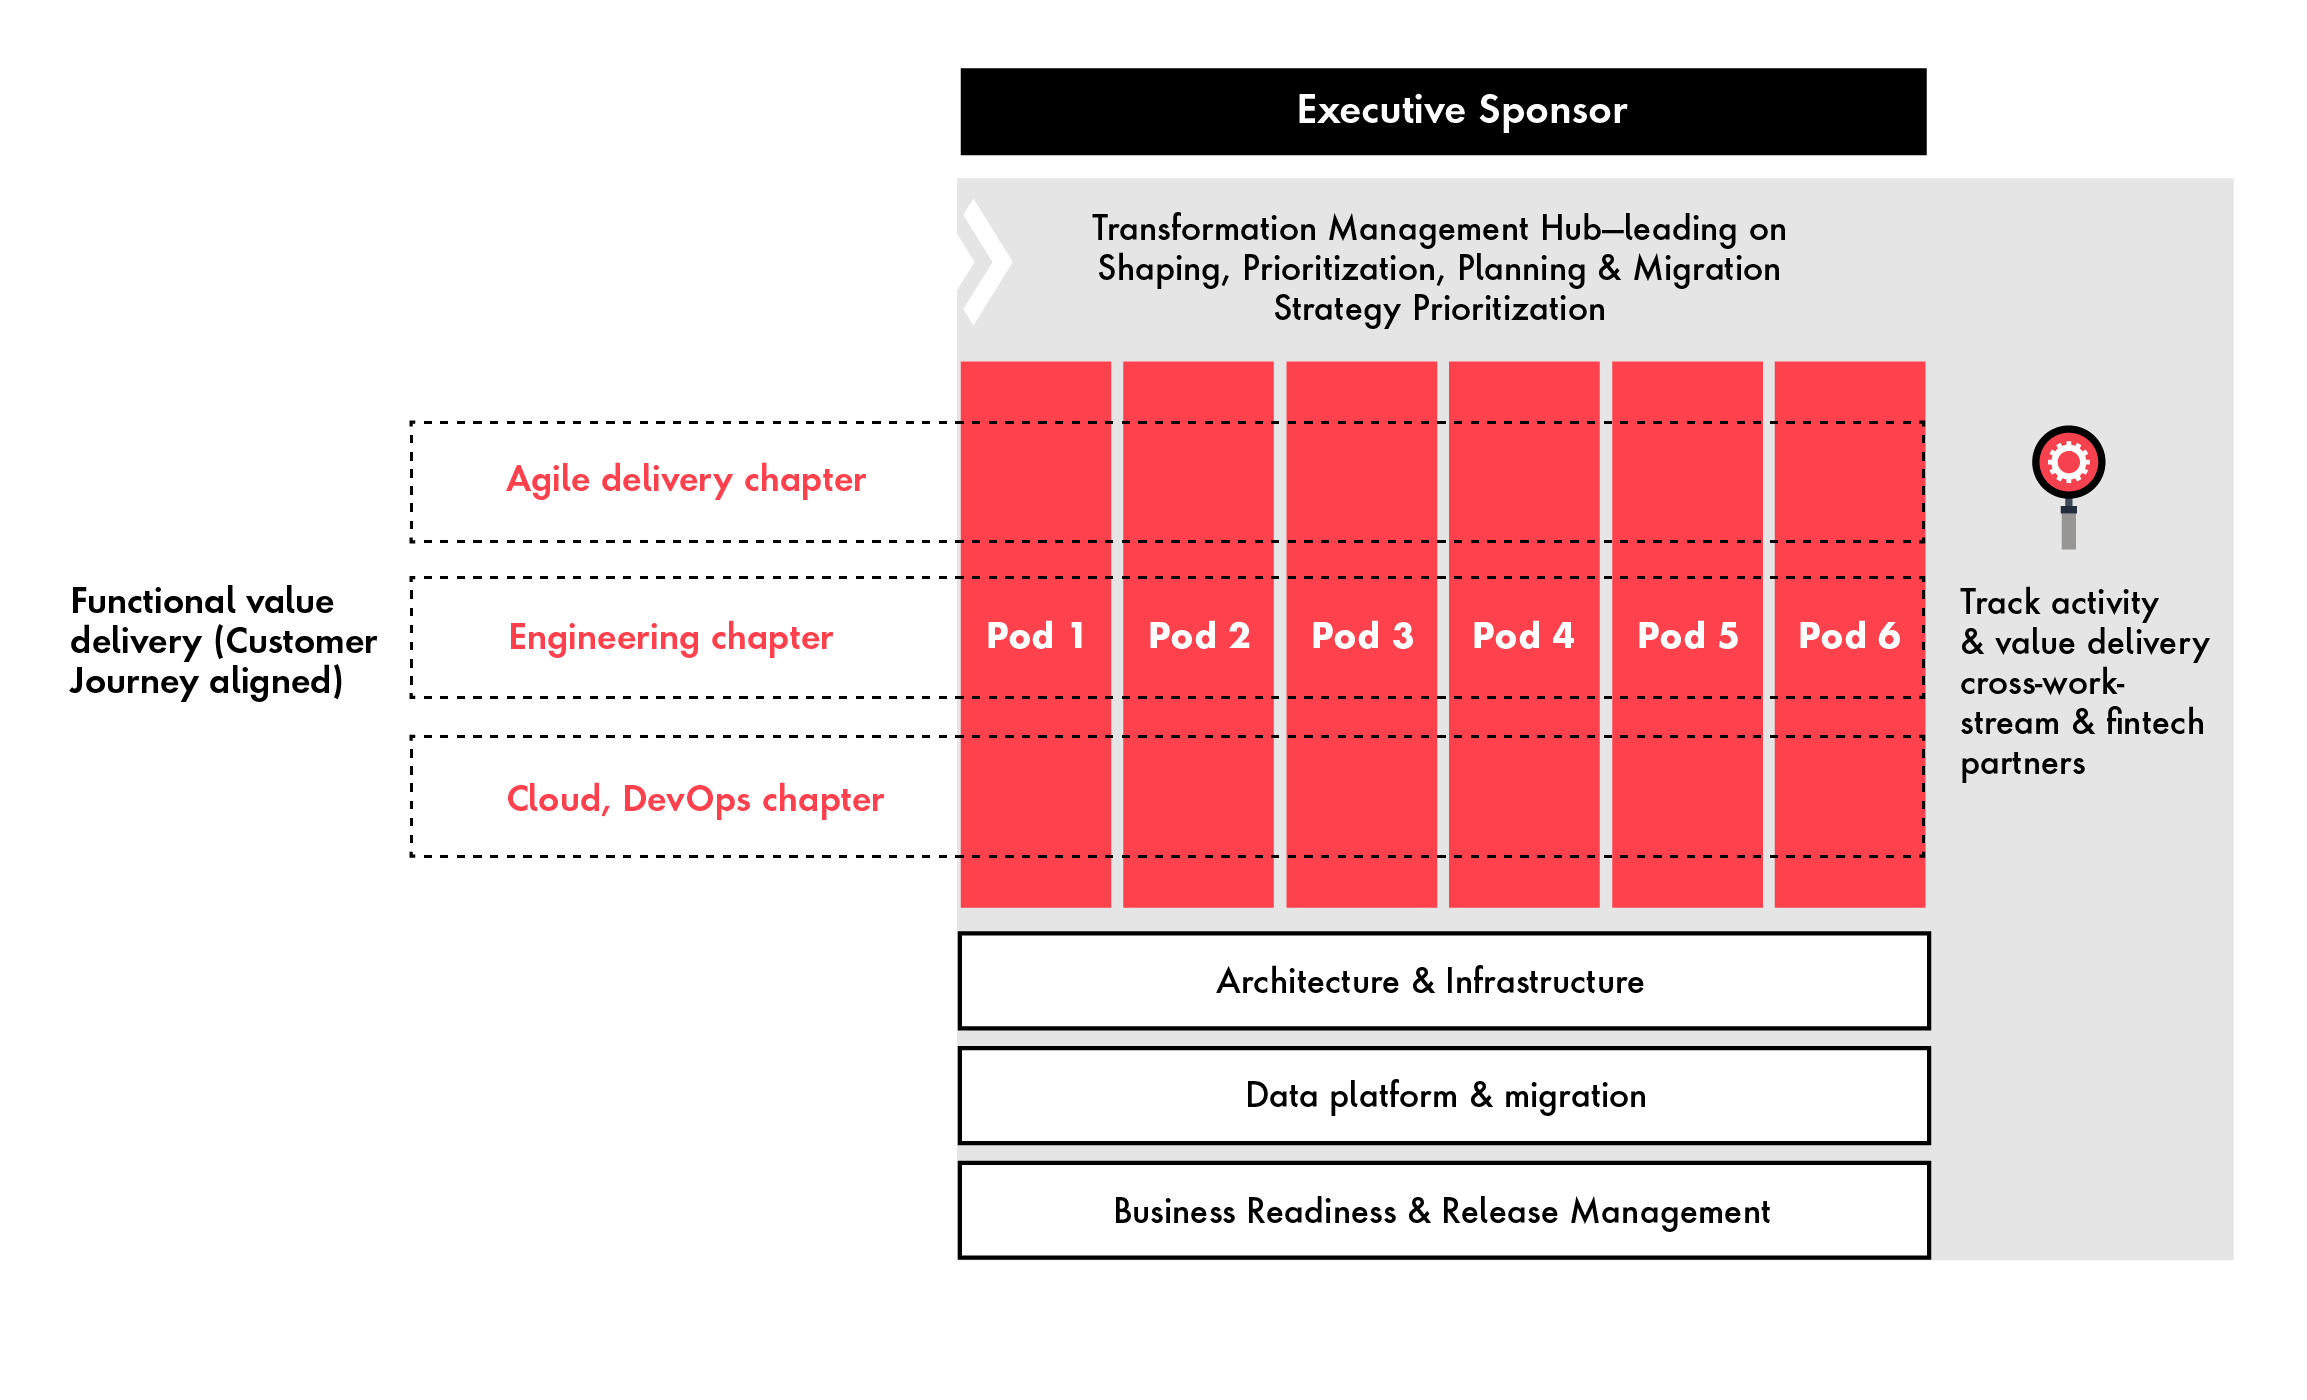 This chart is an example of a governance model in a successful modernization strategy